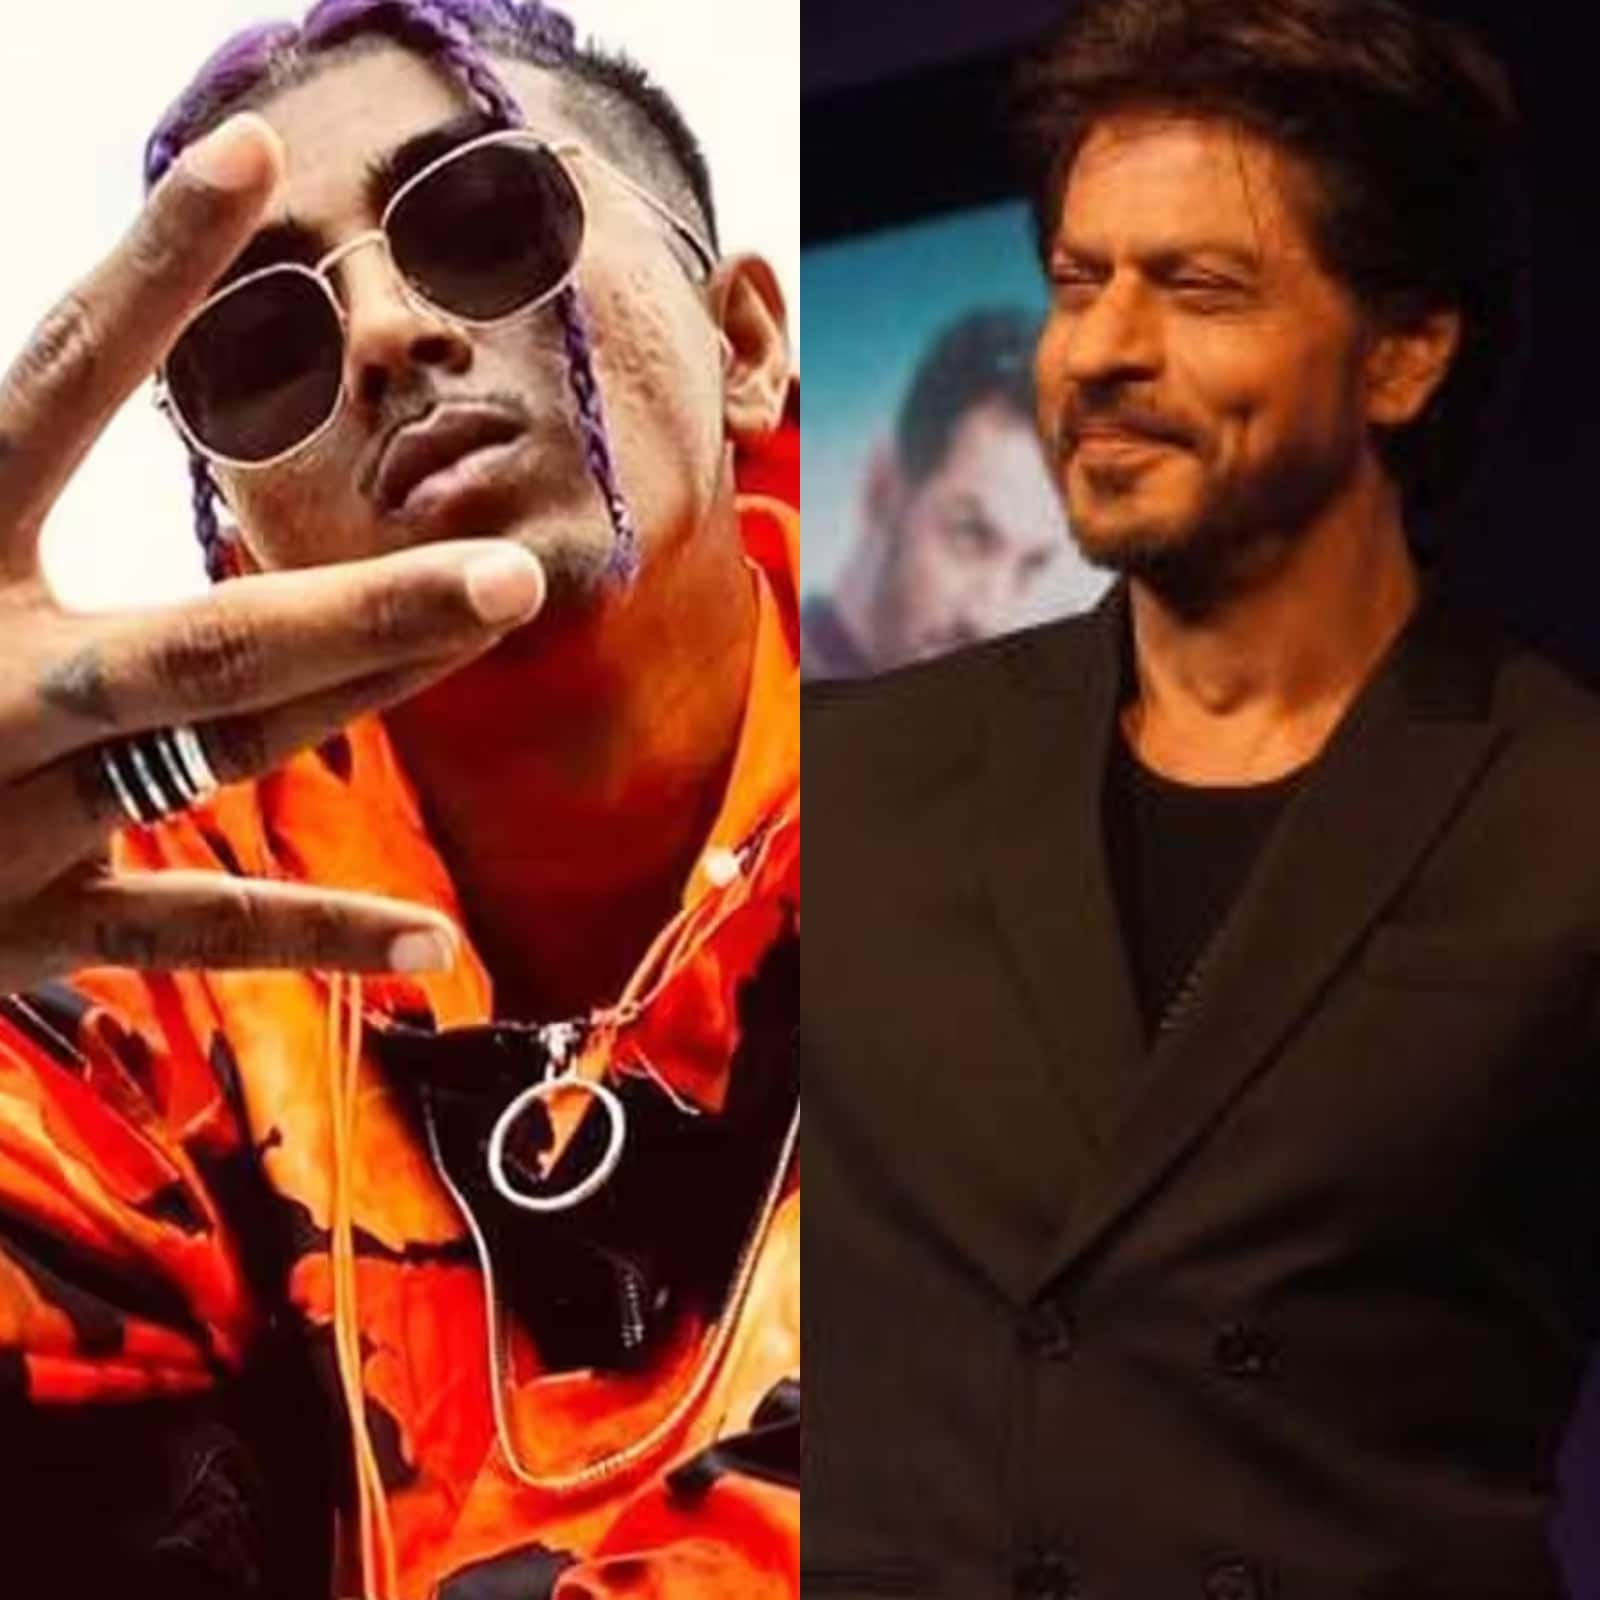 Shahrukh Khan's Outfit Inspired by Bigg Boss 16 MC Stan!!